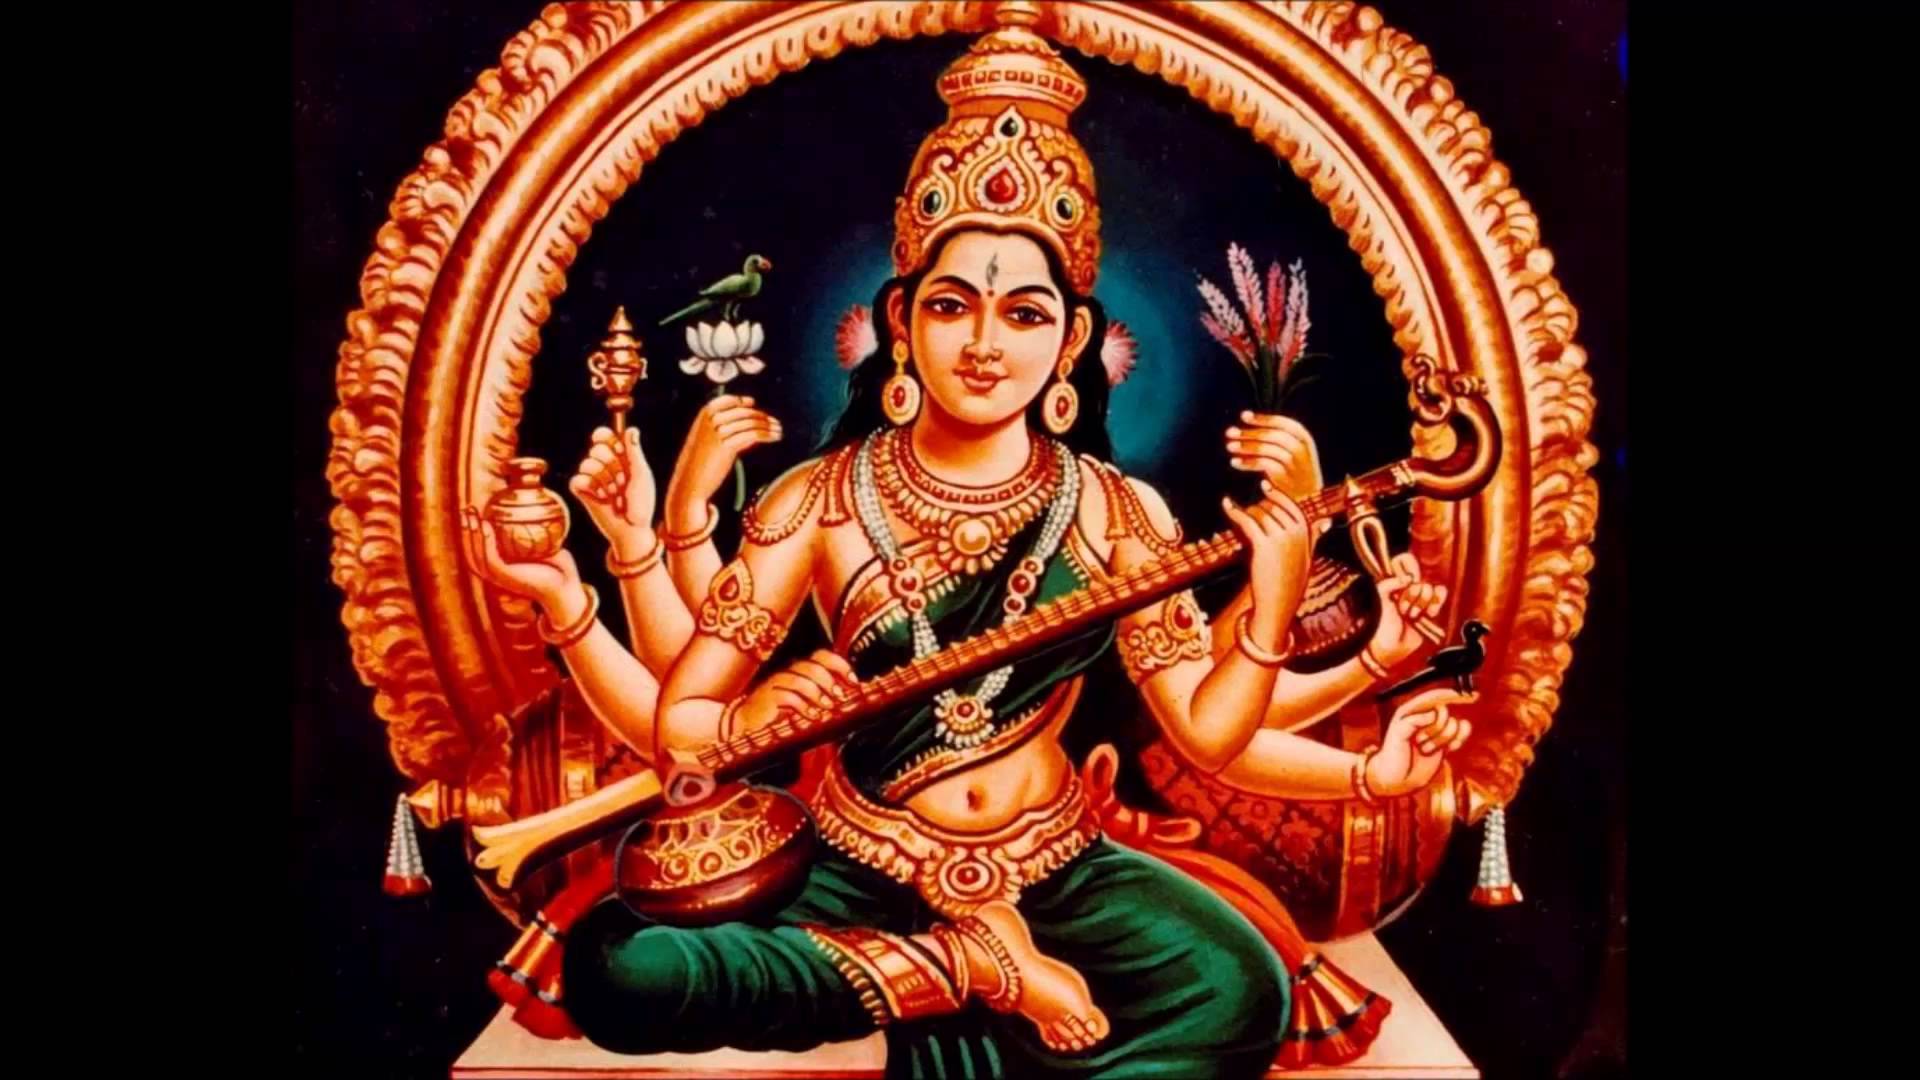 Hindu Gods and Goddesses Wallpapers - Top Free Hindu Gods and Goddesses